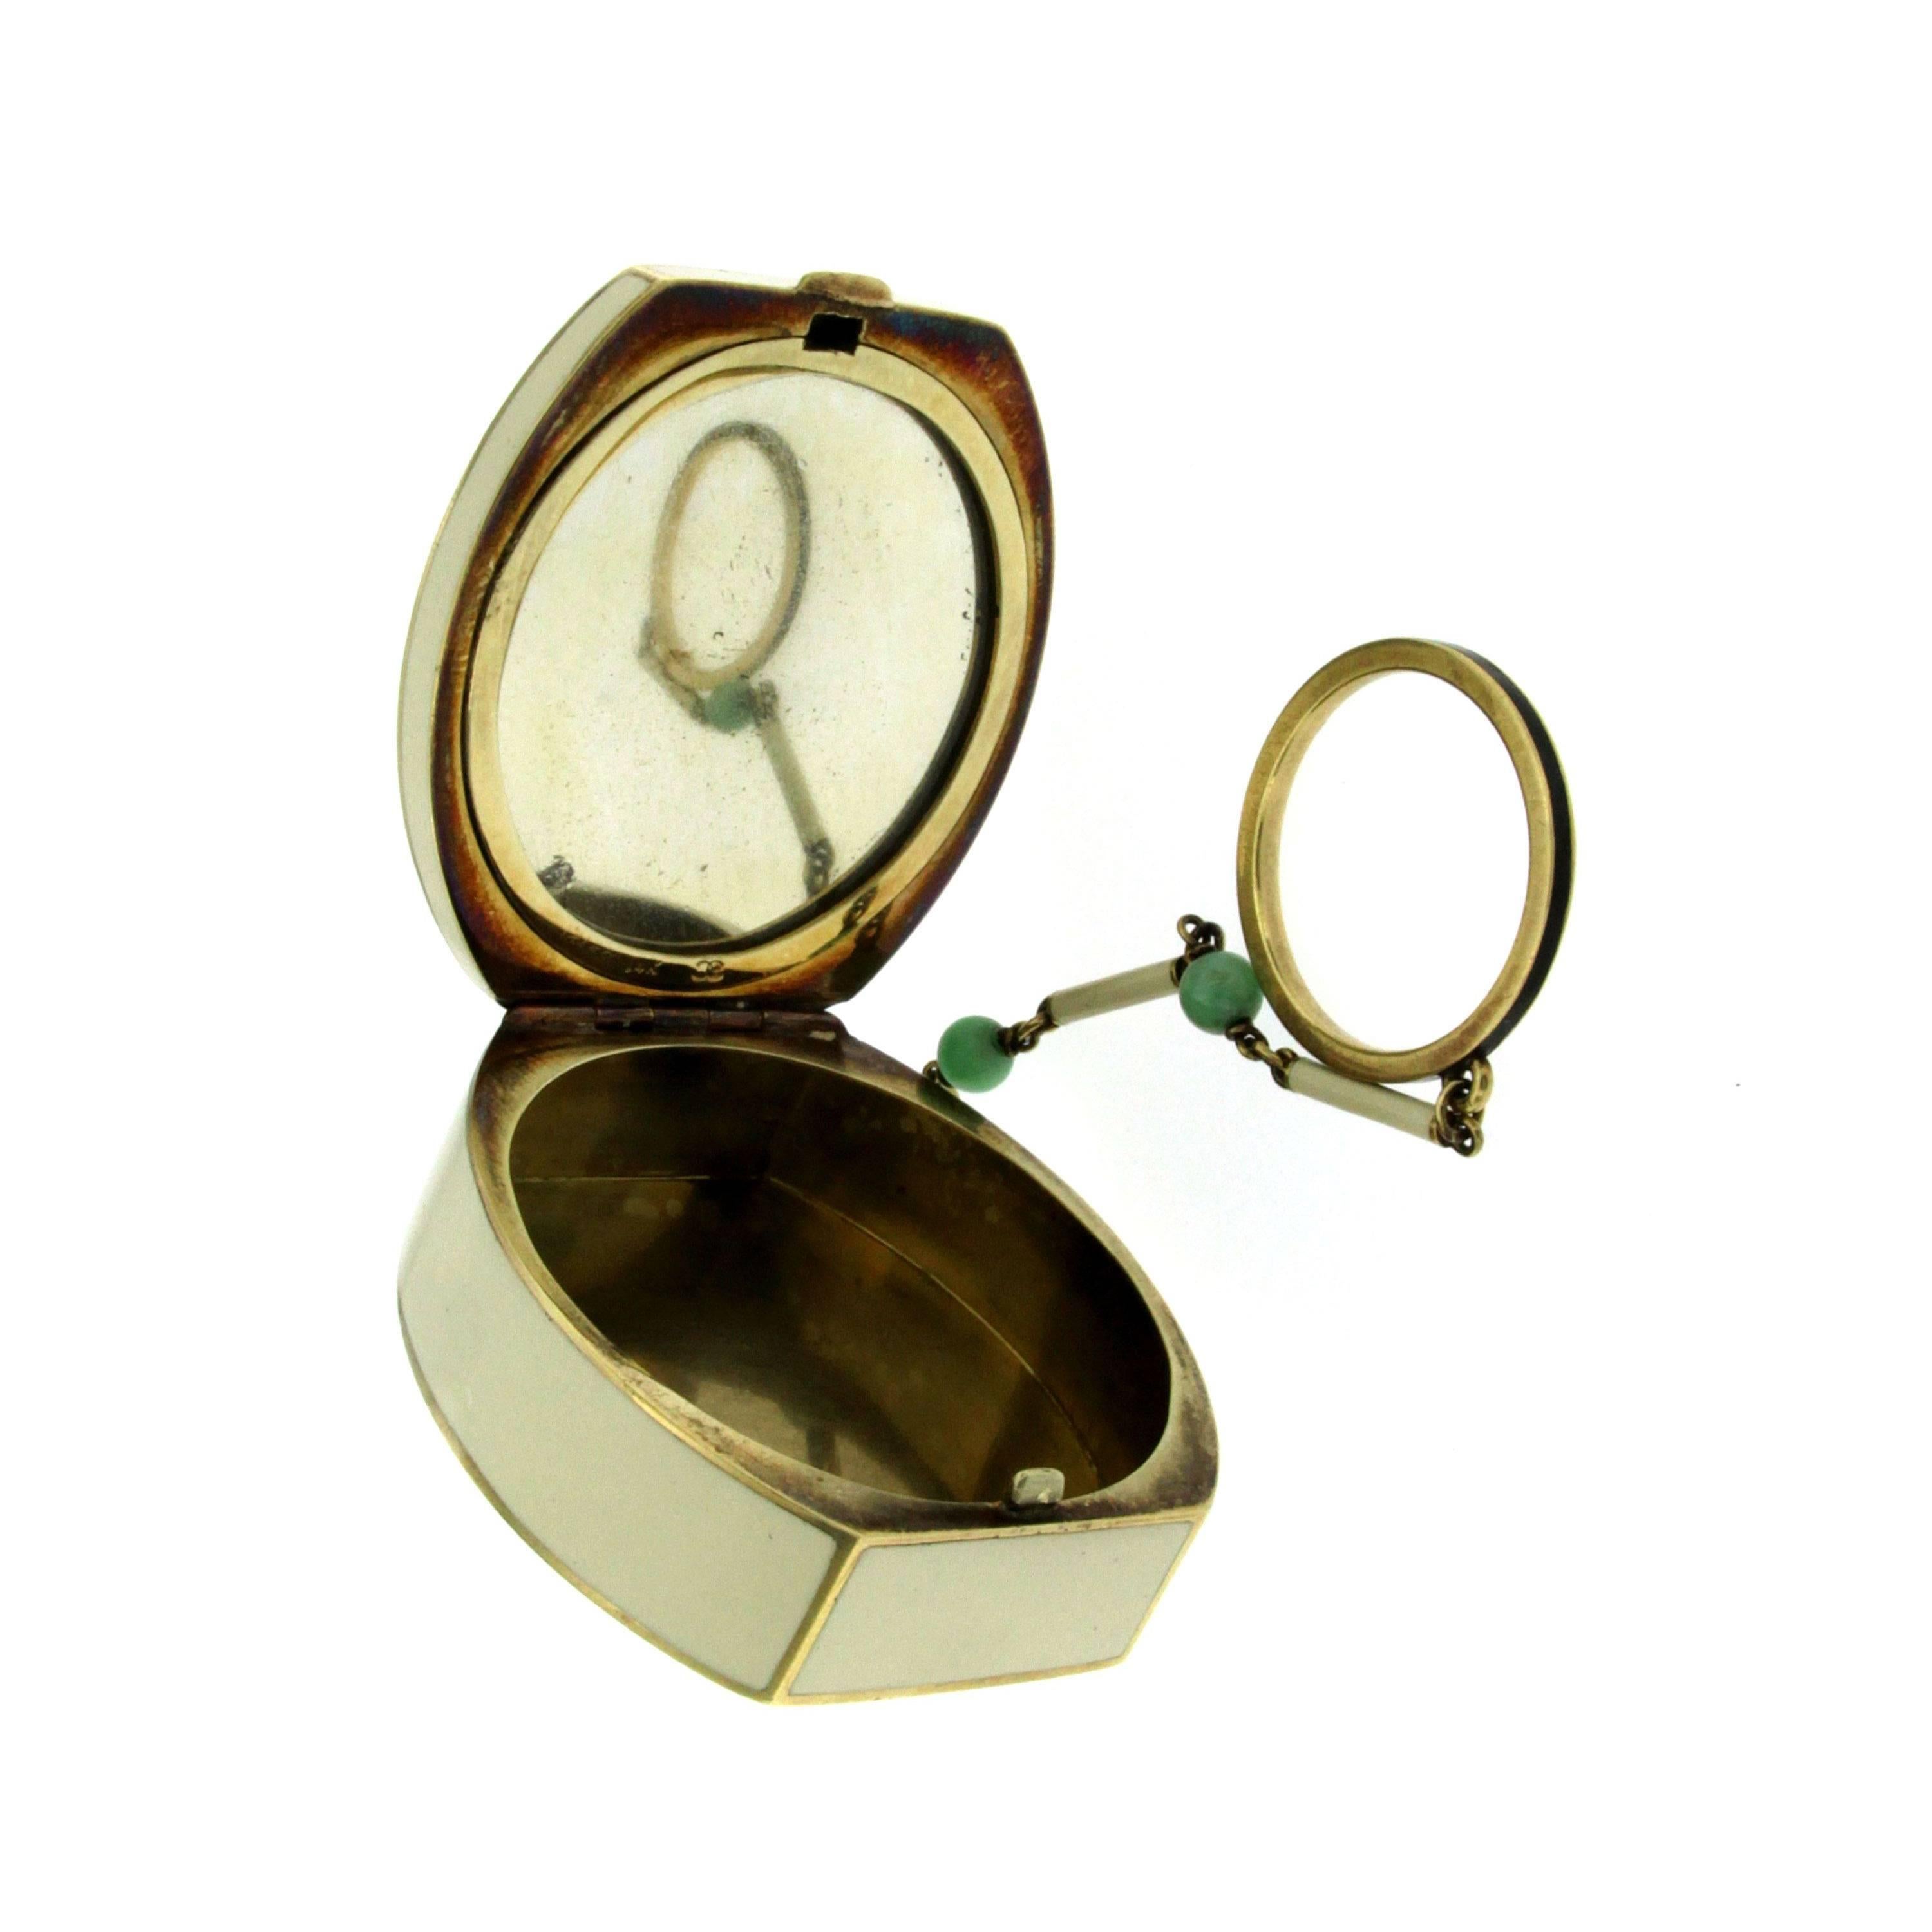 Unique and Rare Vanity box made of 14k yellow gold opening to reveal a fitted mirror, American Origin, in Excellent condition considering the age.
The box features an hand crafted natural green Jade in the middle surrounded by 0,60 ct approx. of